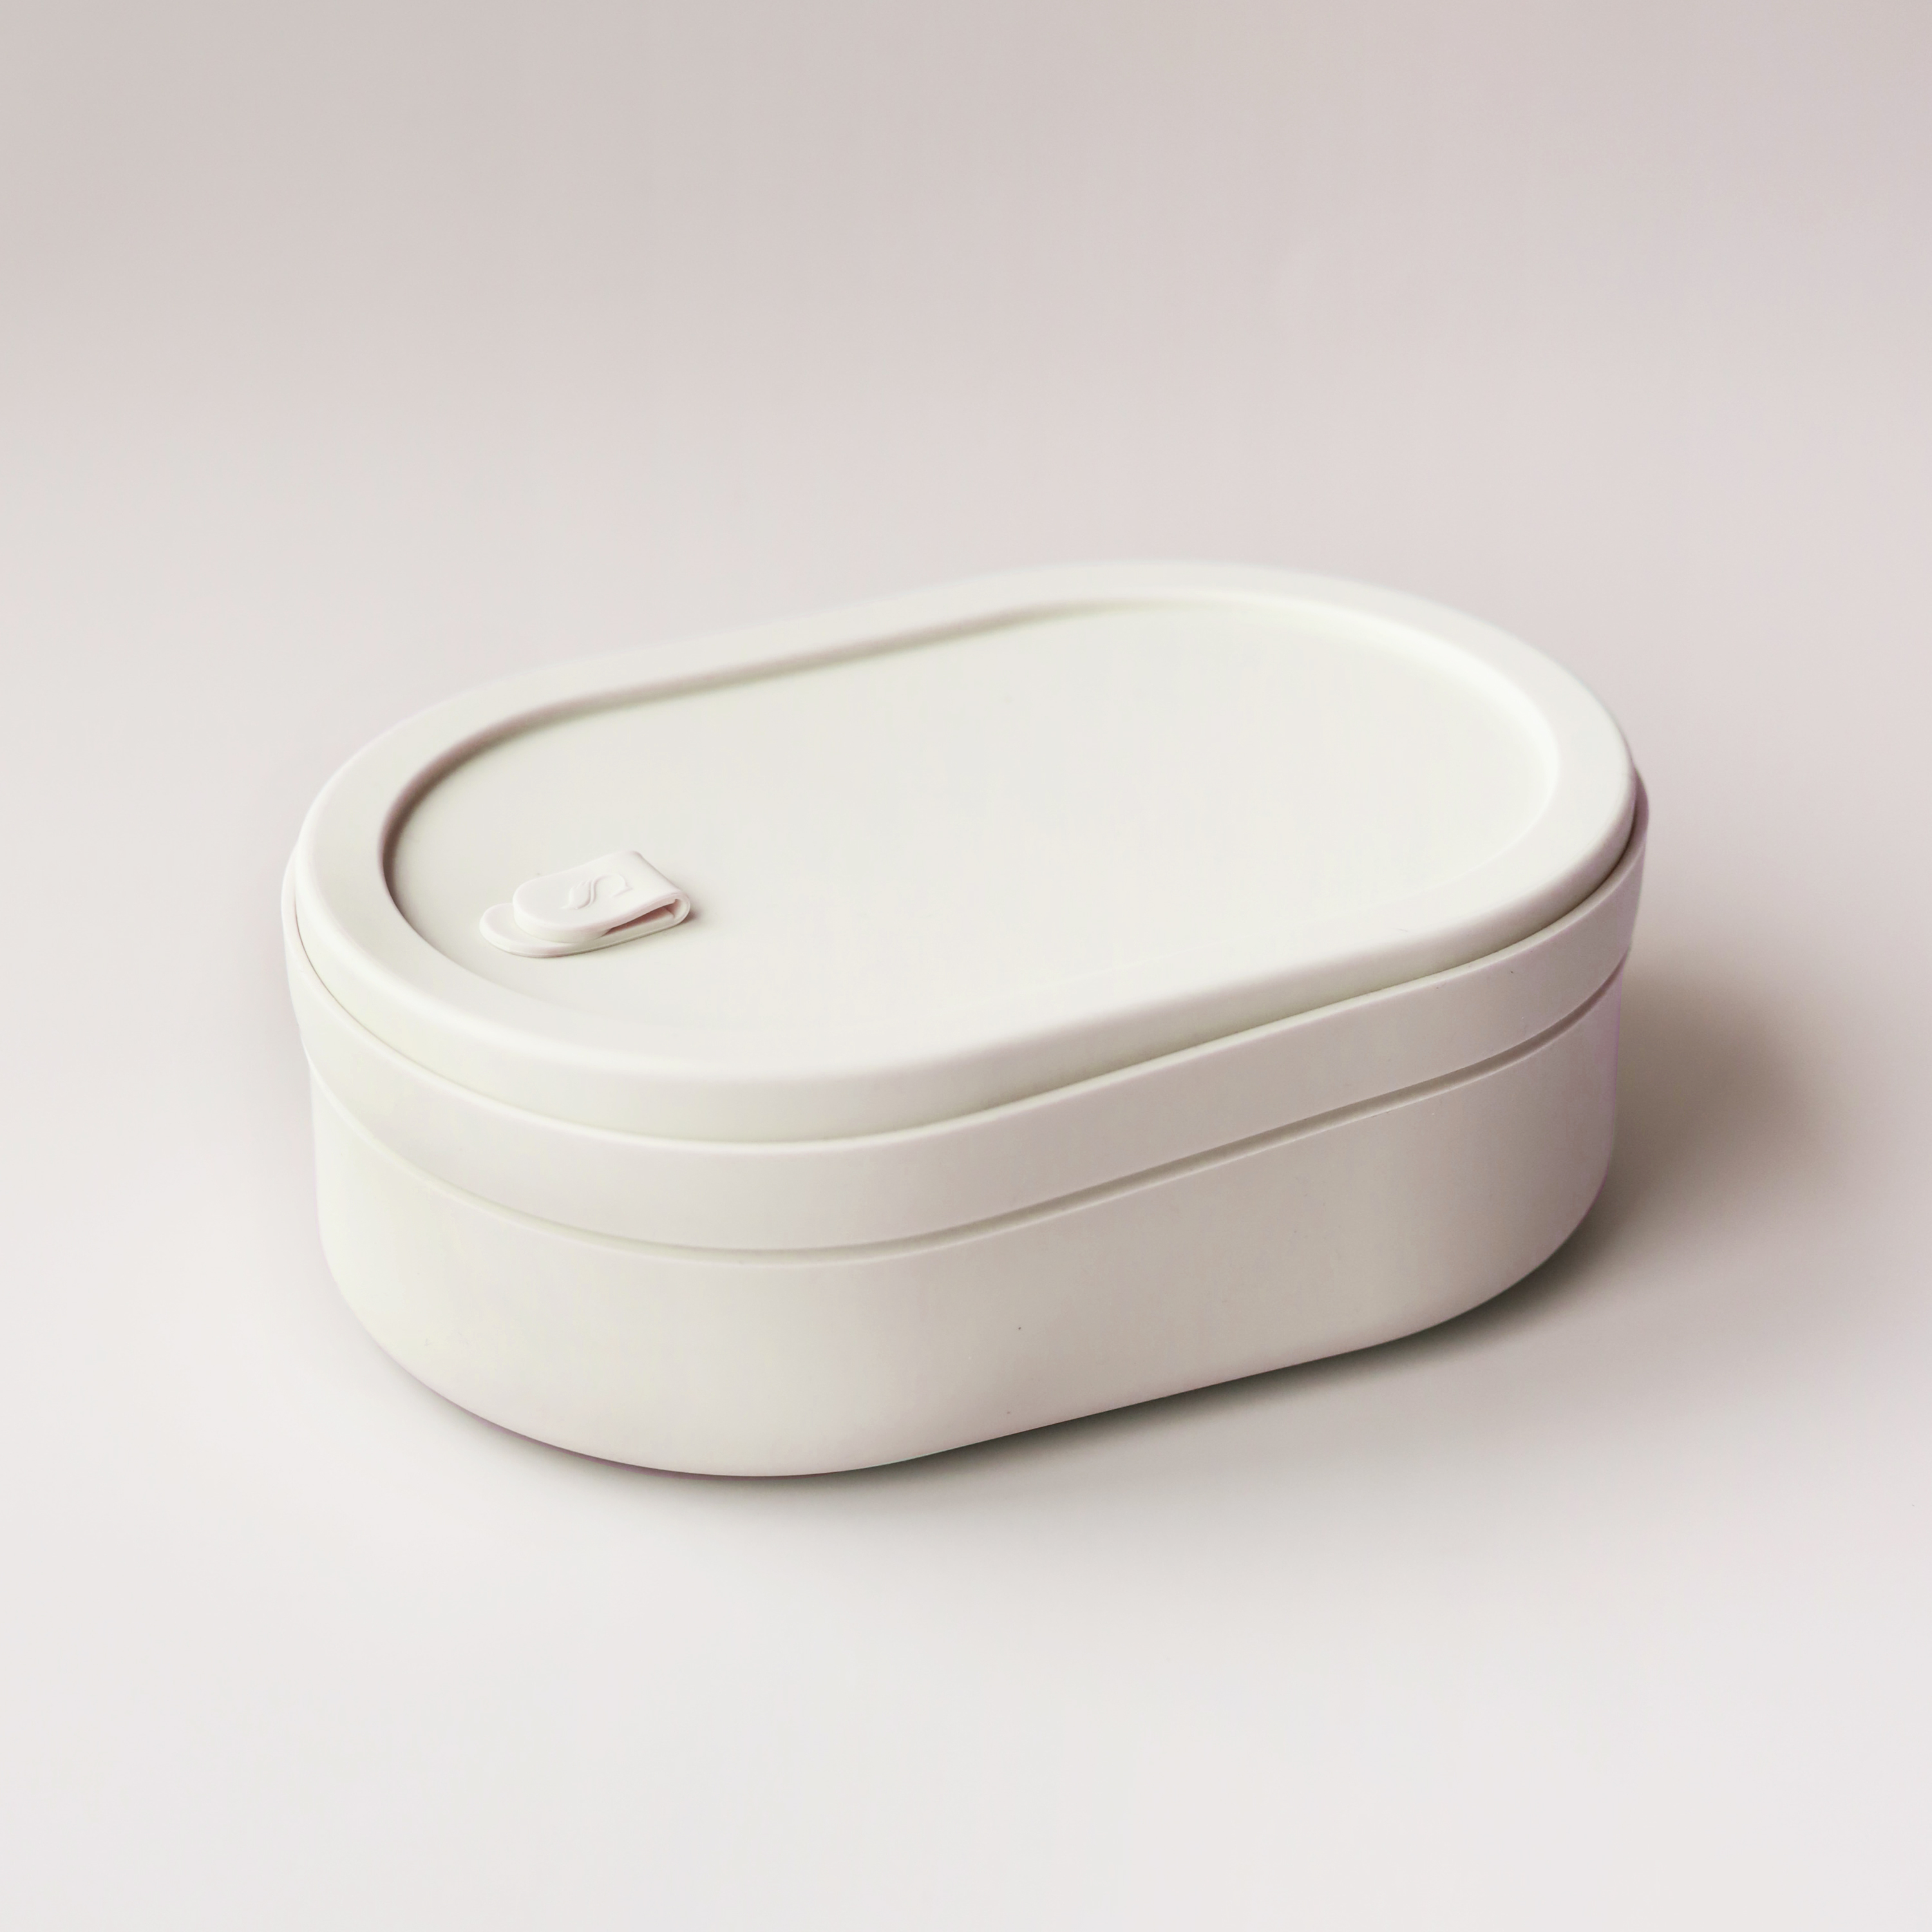 Ohayo Bento 900ml (1 compartment with silicone strap)